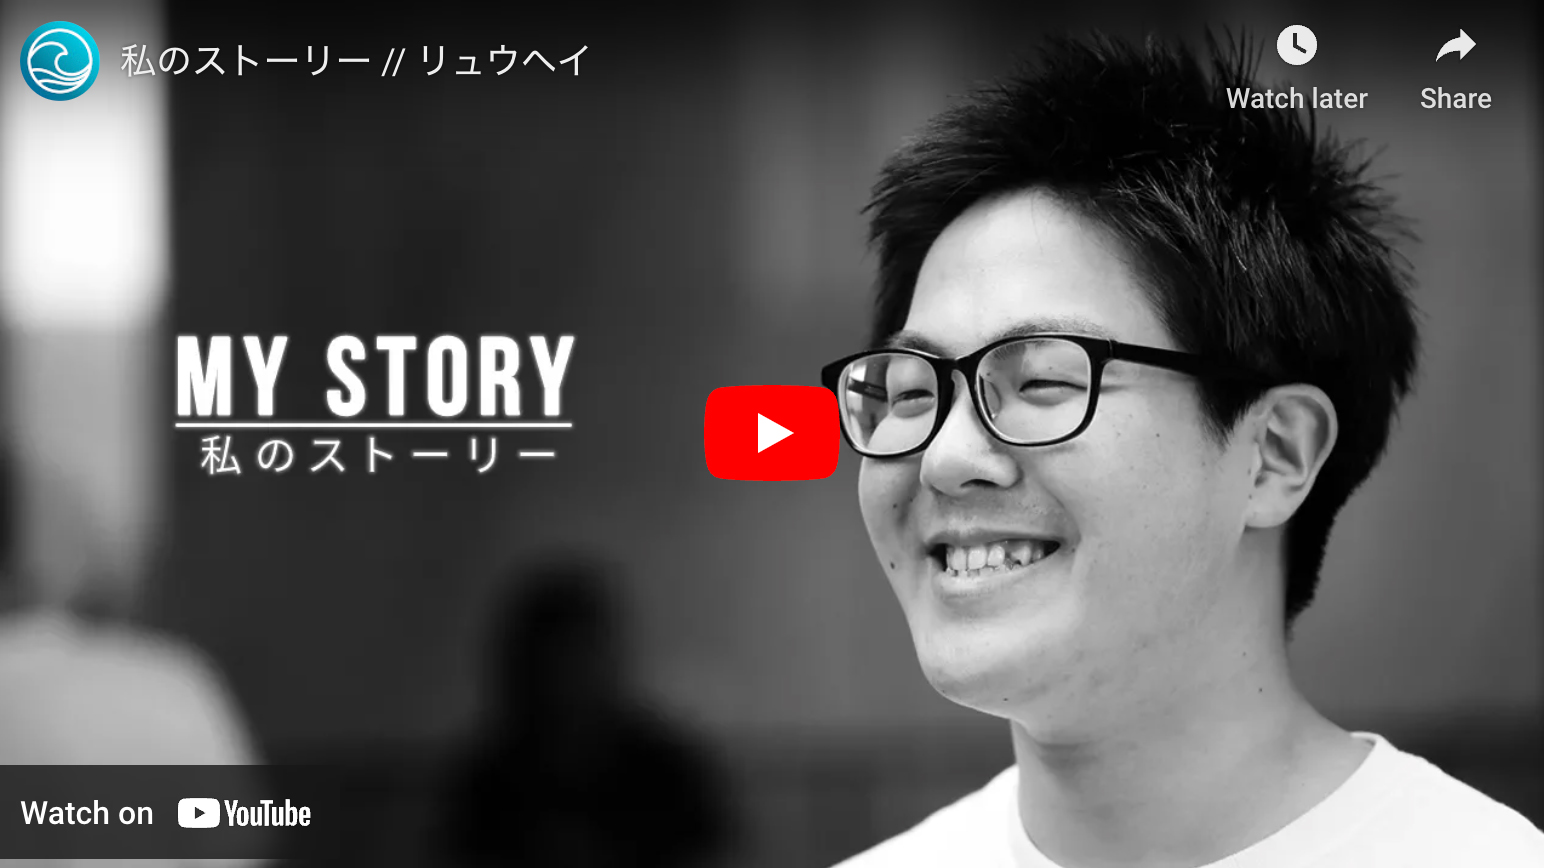 Featured image for “Ryuhei’s Story”